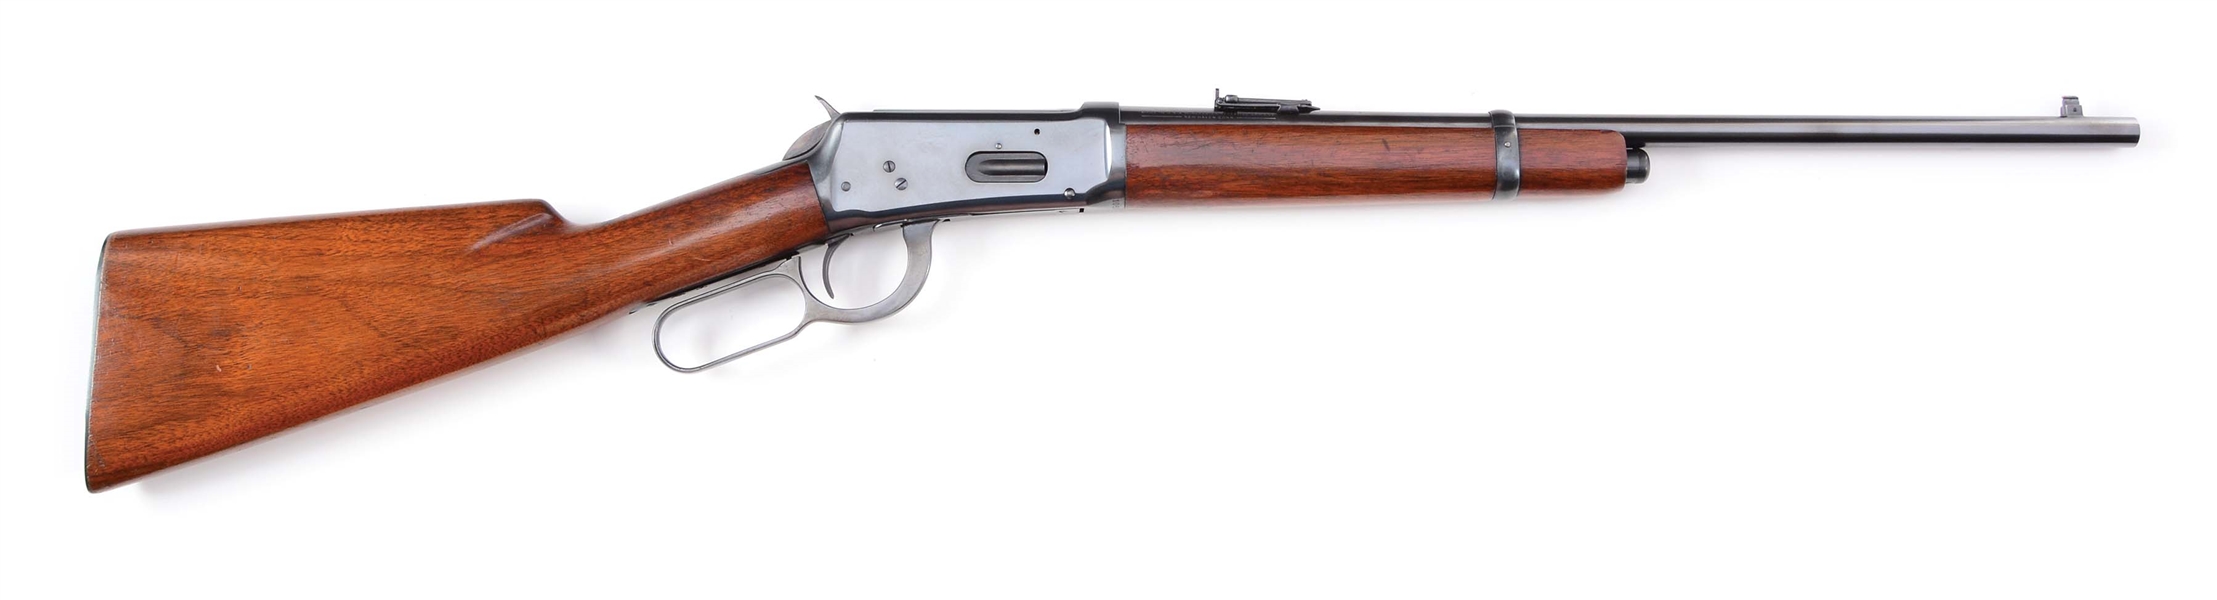 (C) NEAR NEW SPECIAL ORDER WINCHESTER MODEL 1894 LEVER ACTION CARBINE (1928).